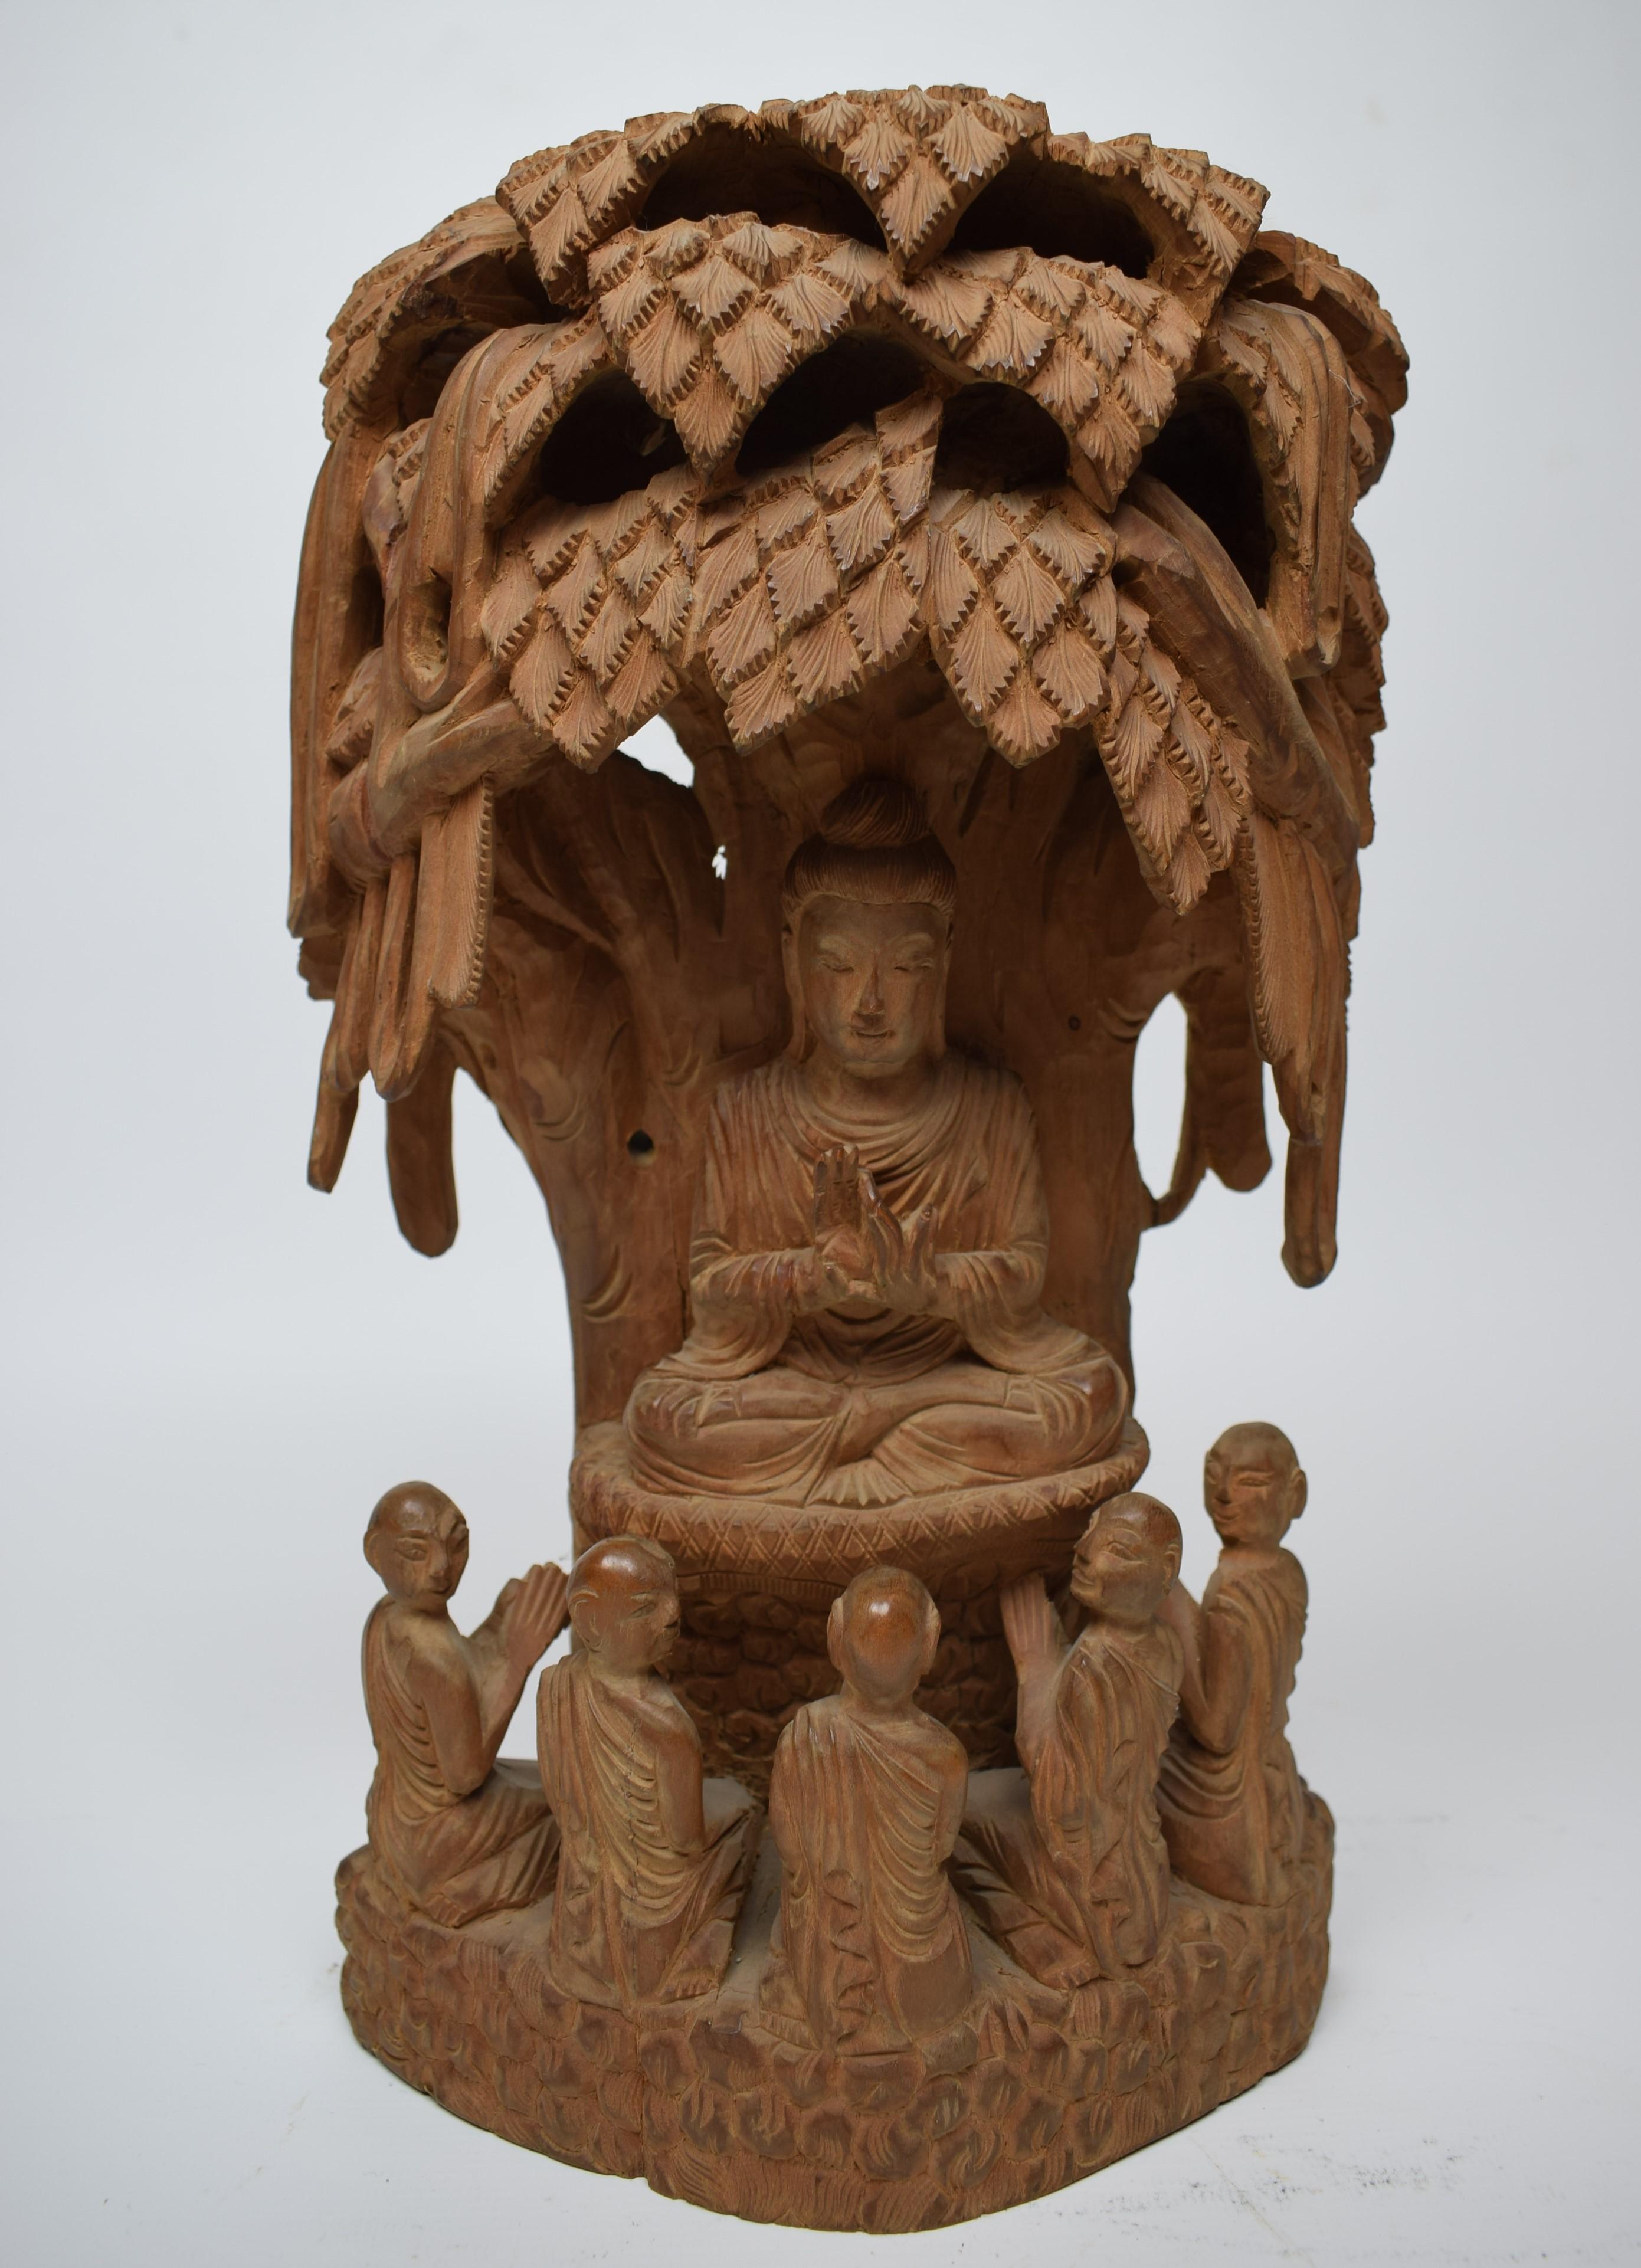 The sculpture, expertly carved from fragrant Nepalese sandalwood, stands as a testament to the rich tradition of wood carving in Nepal. The medium itself adds a sensory dimension to the artwork, with the subtle, natural aroma of sandalwood enhancing